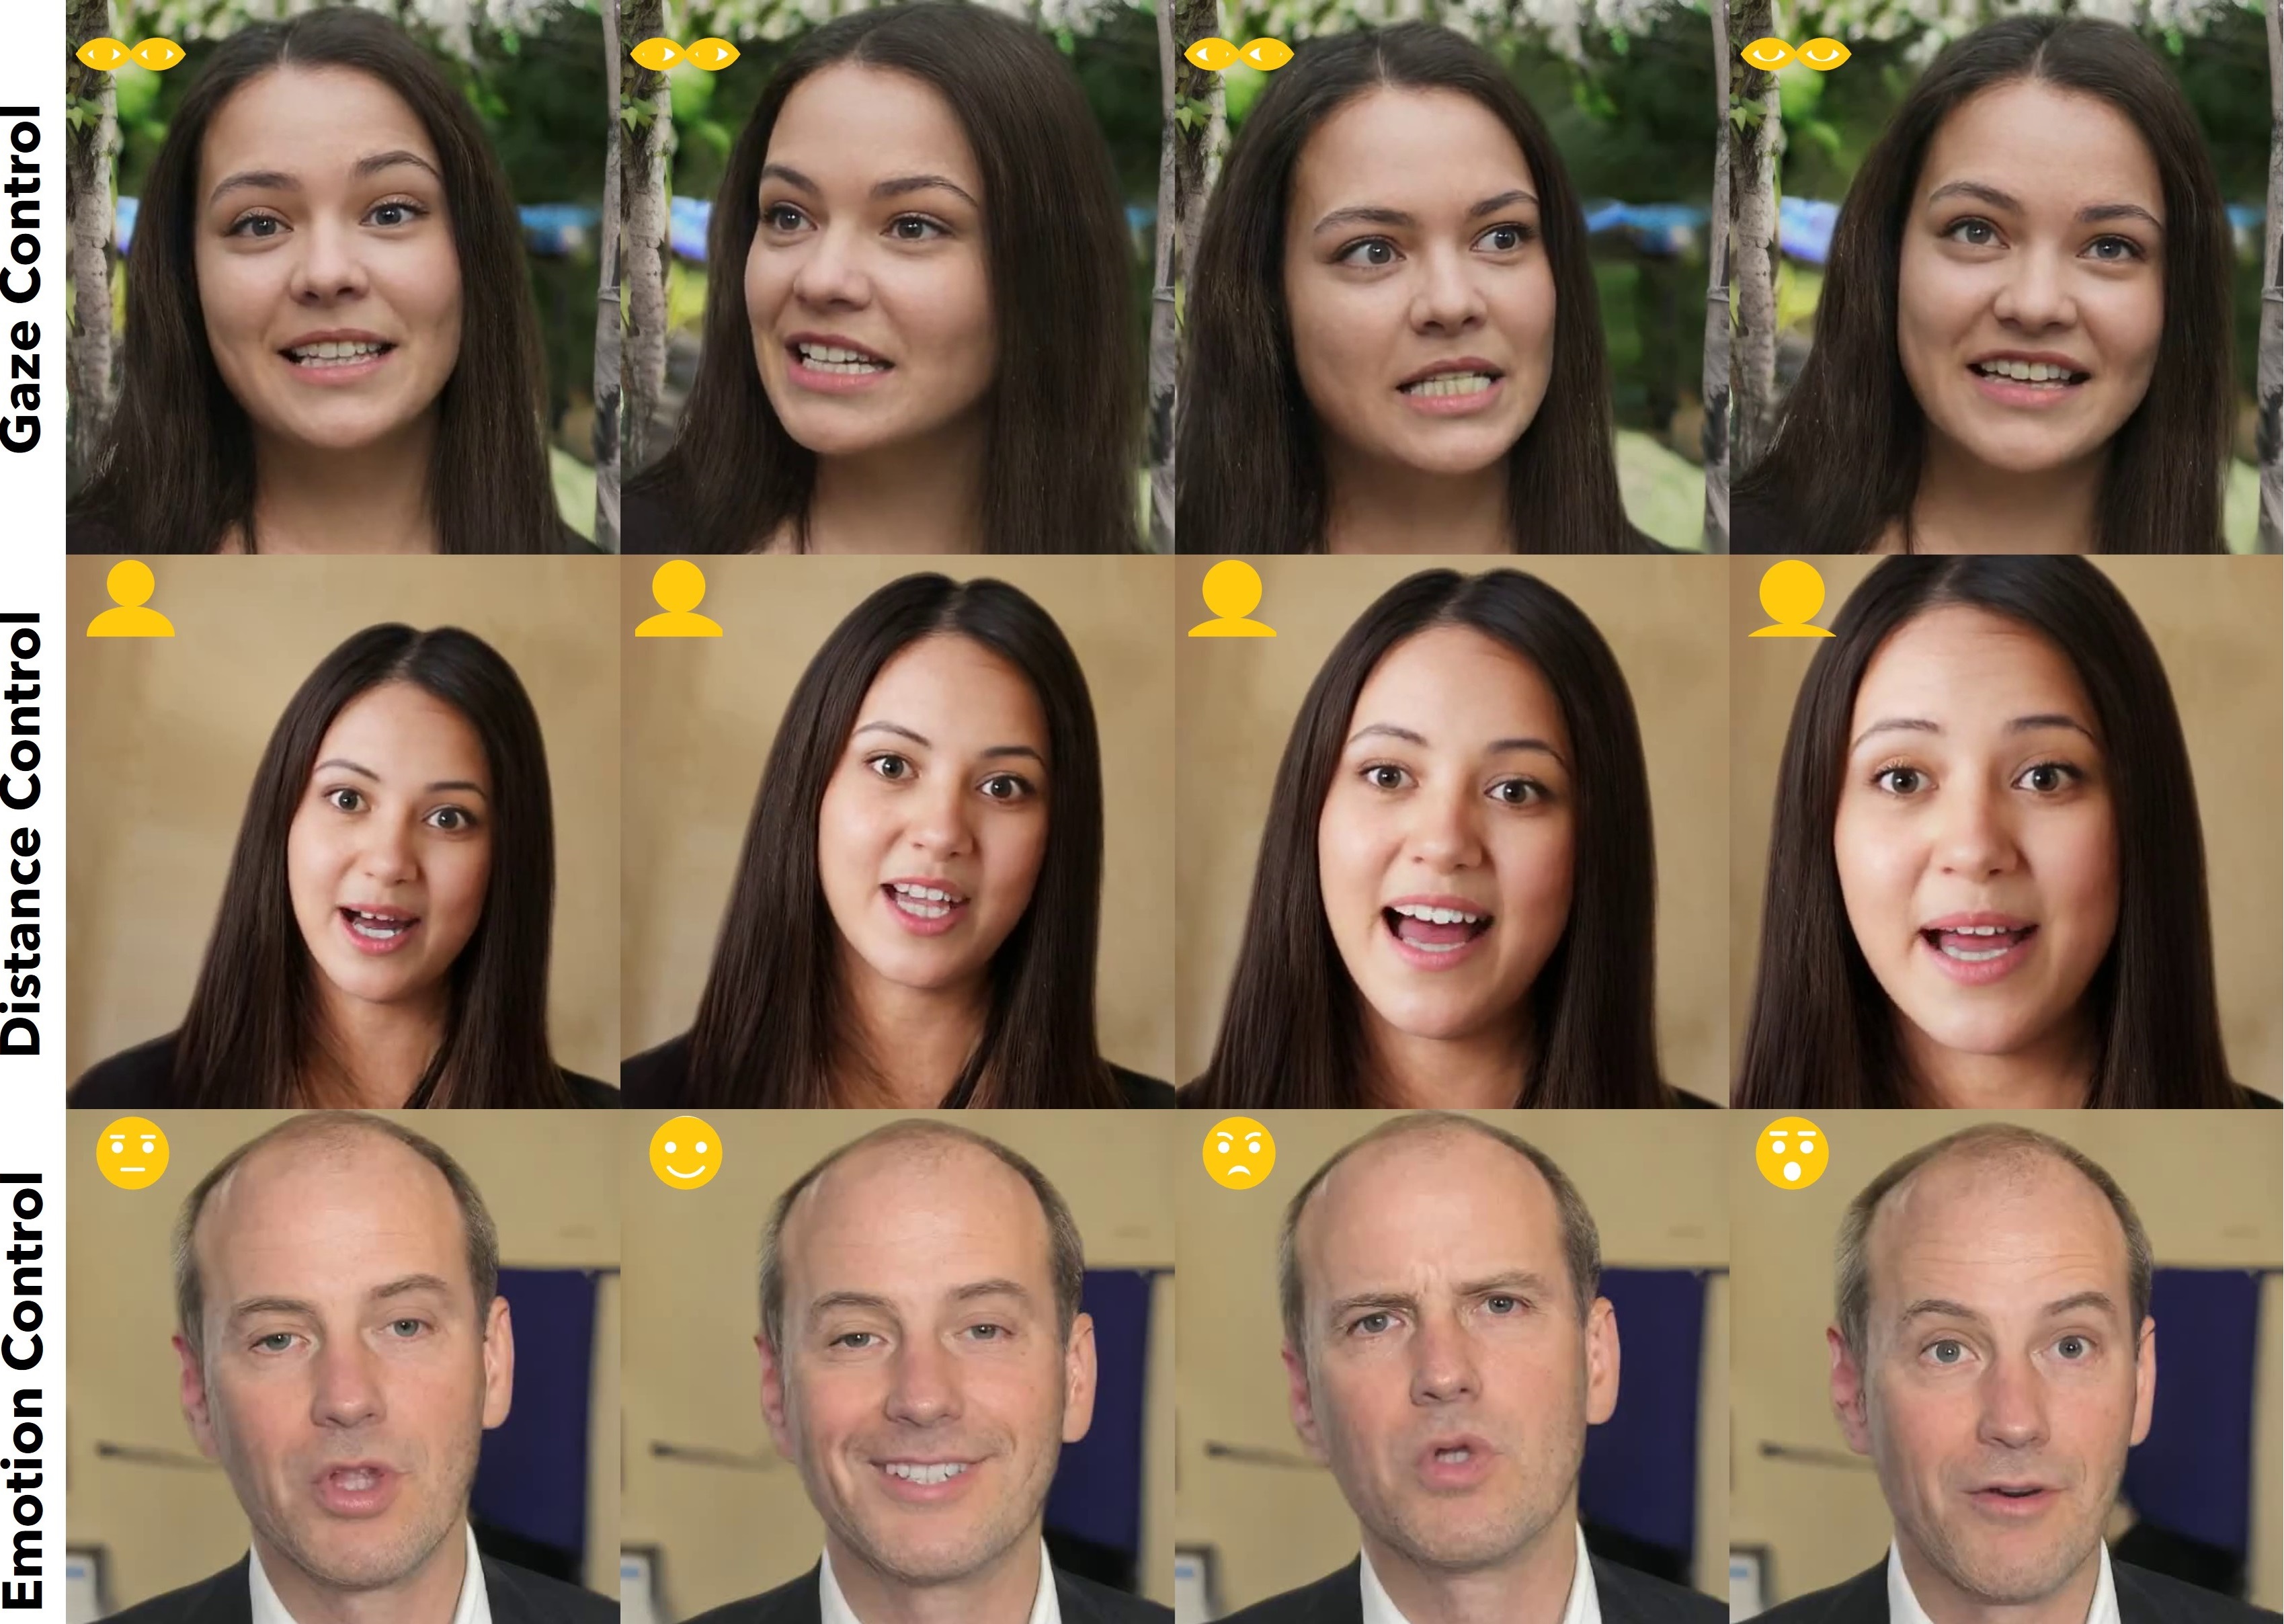 VASA-1: Lifelike Audio-Driven Talking Faces Generated in Real Time